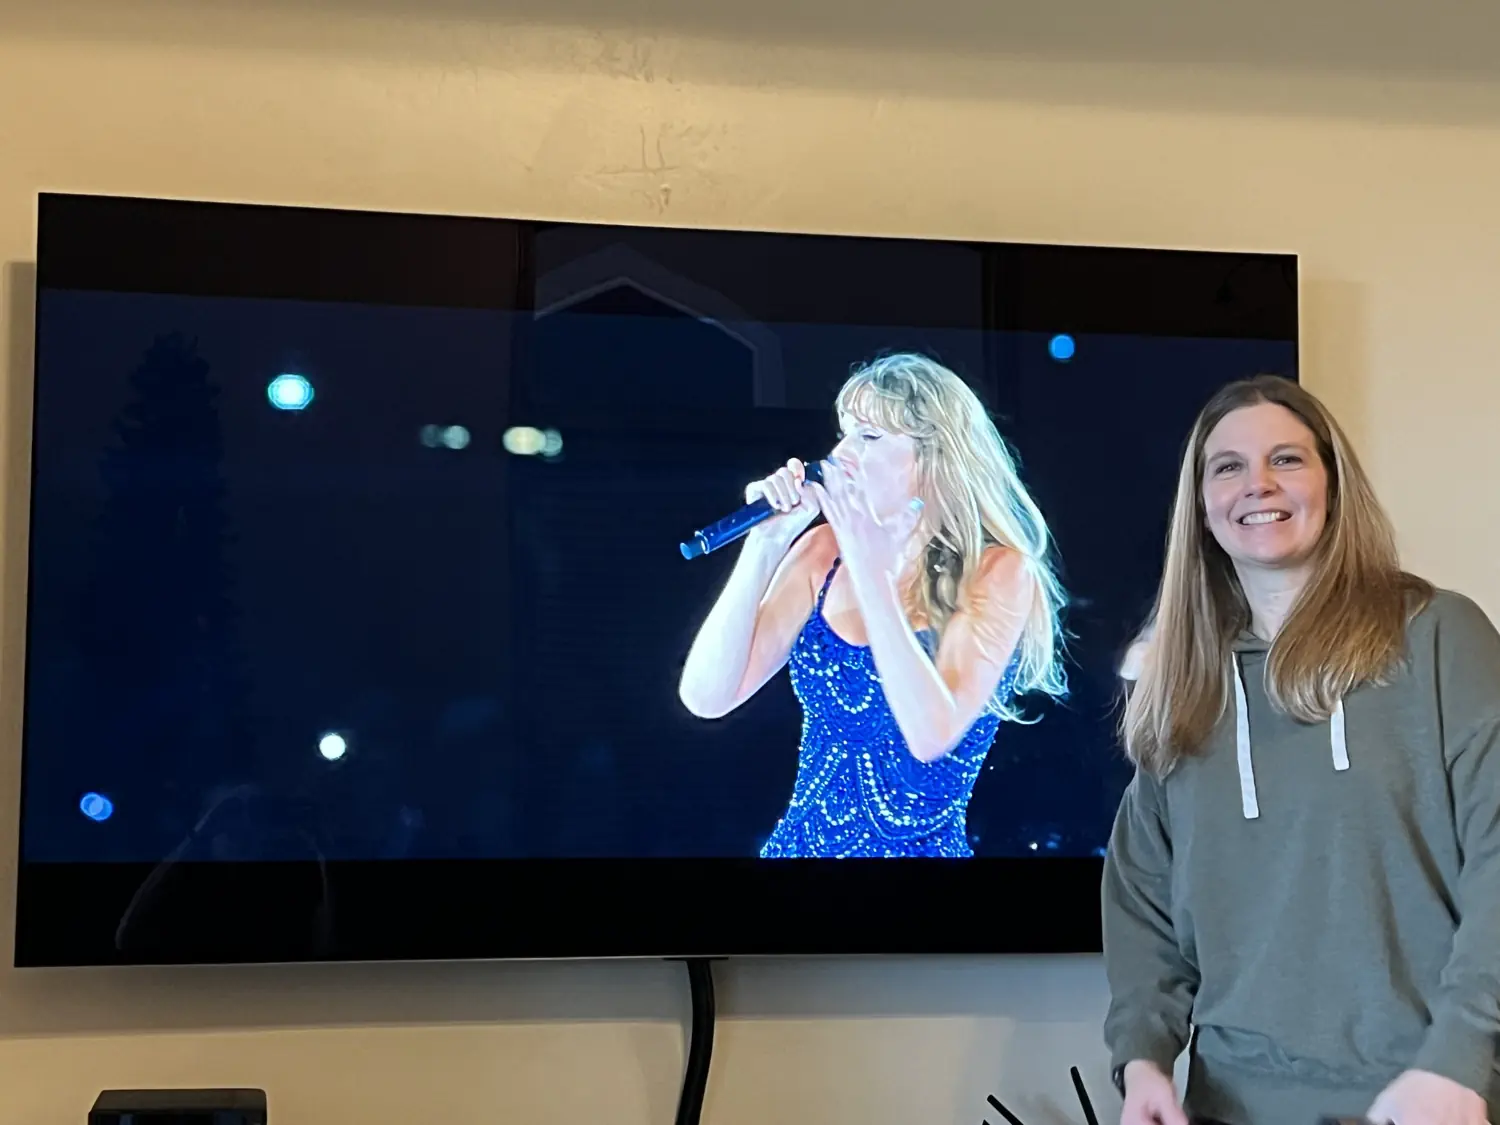 Lindsey is posing in front of a TV displaying Taylor Swift singing on stage